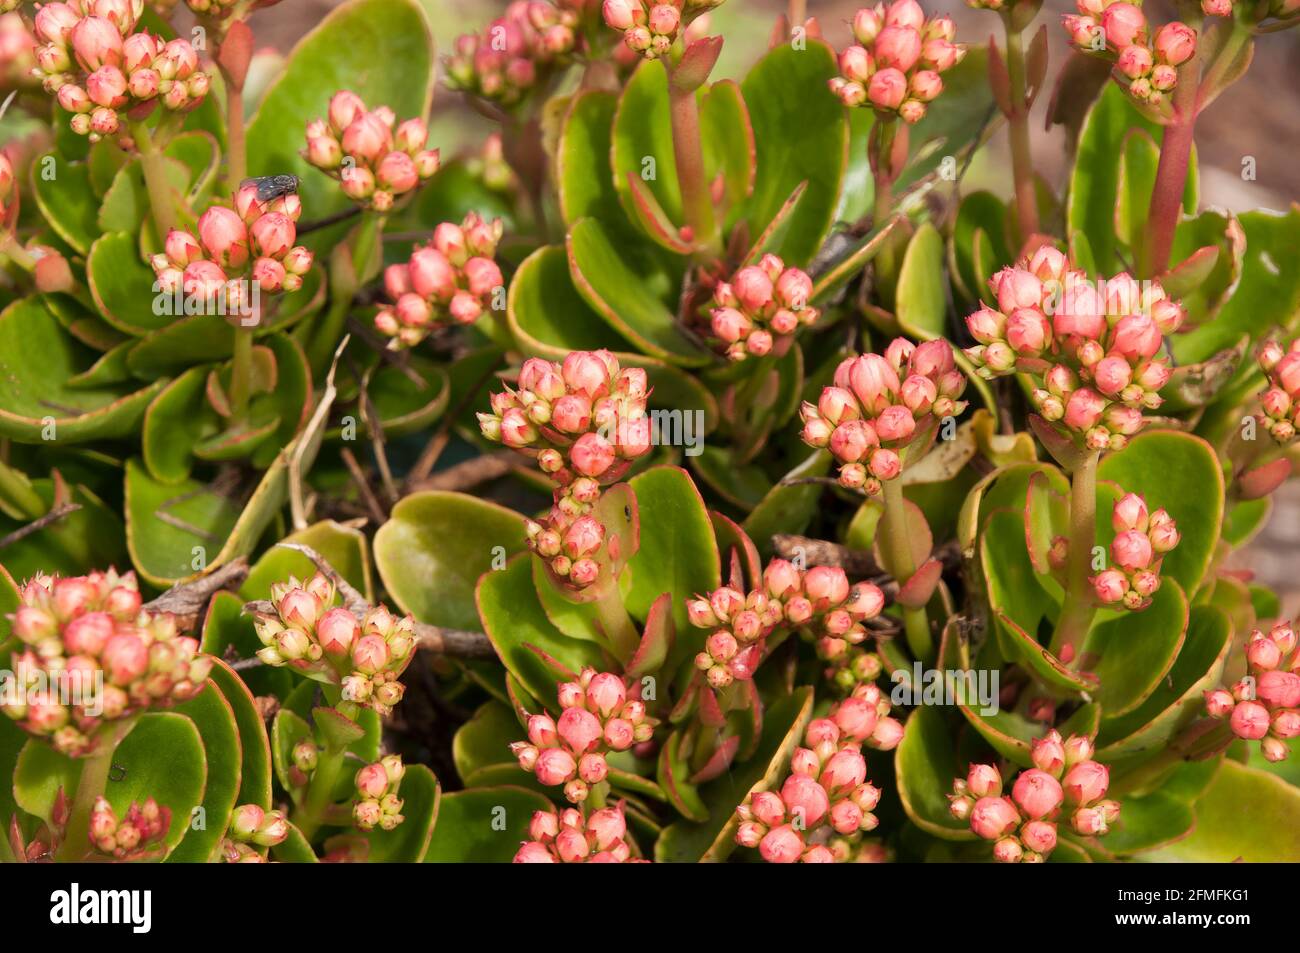 Sydney Australia, leaves and pink buds of a calandiva kalanchoe succulent Stock Photo